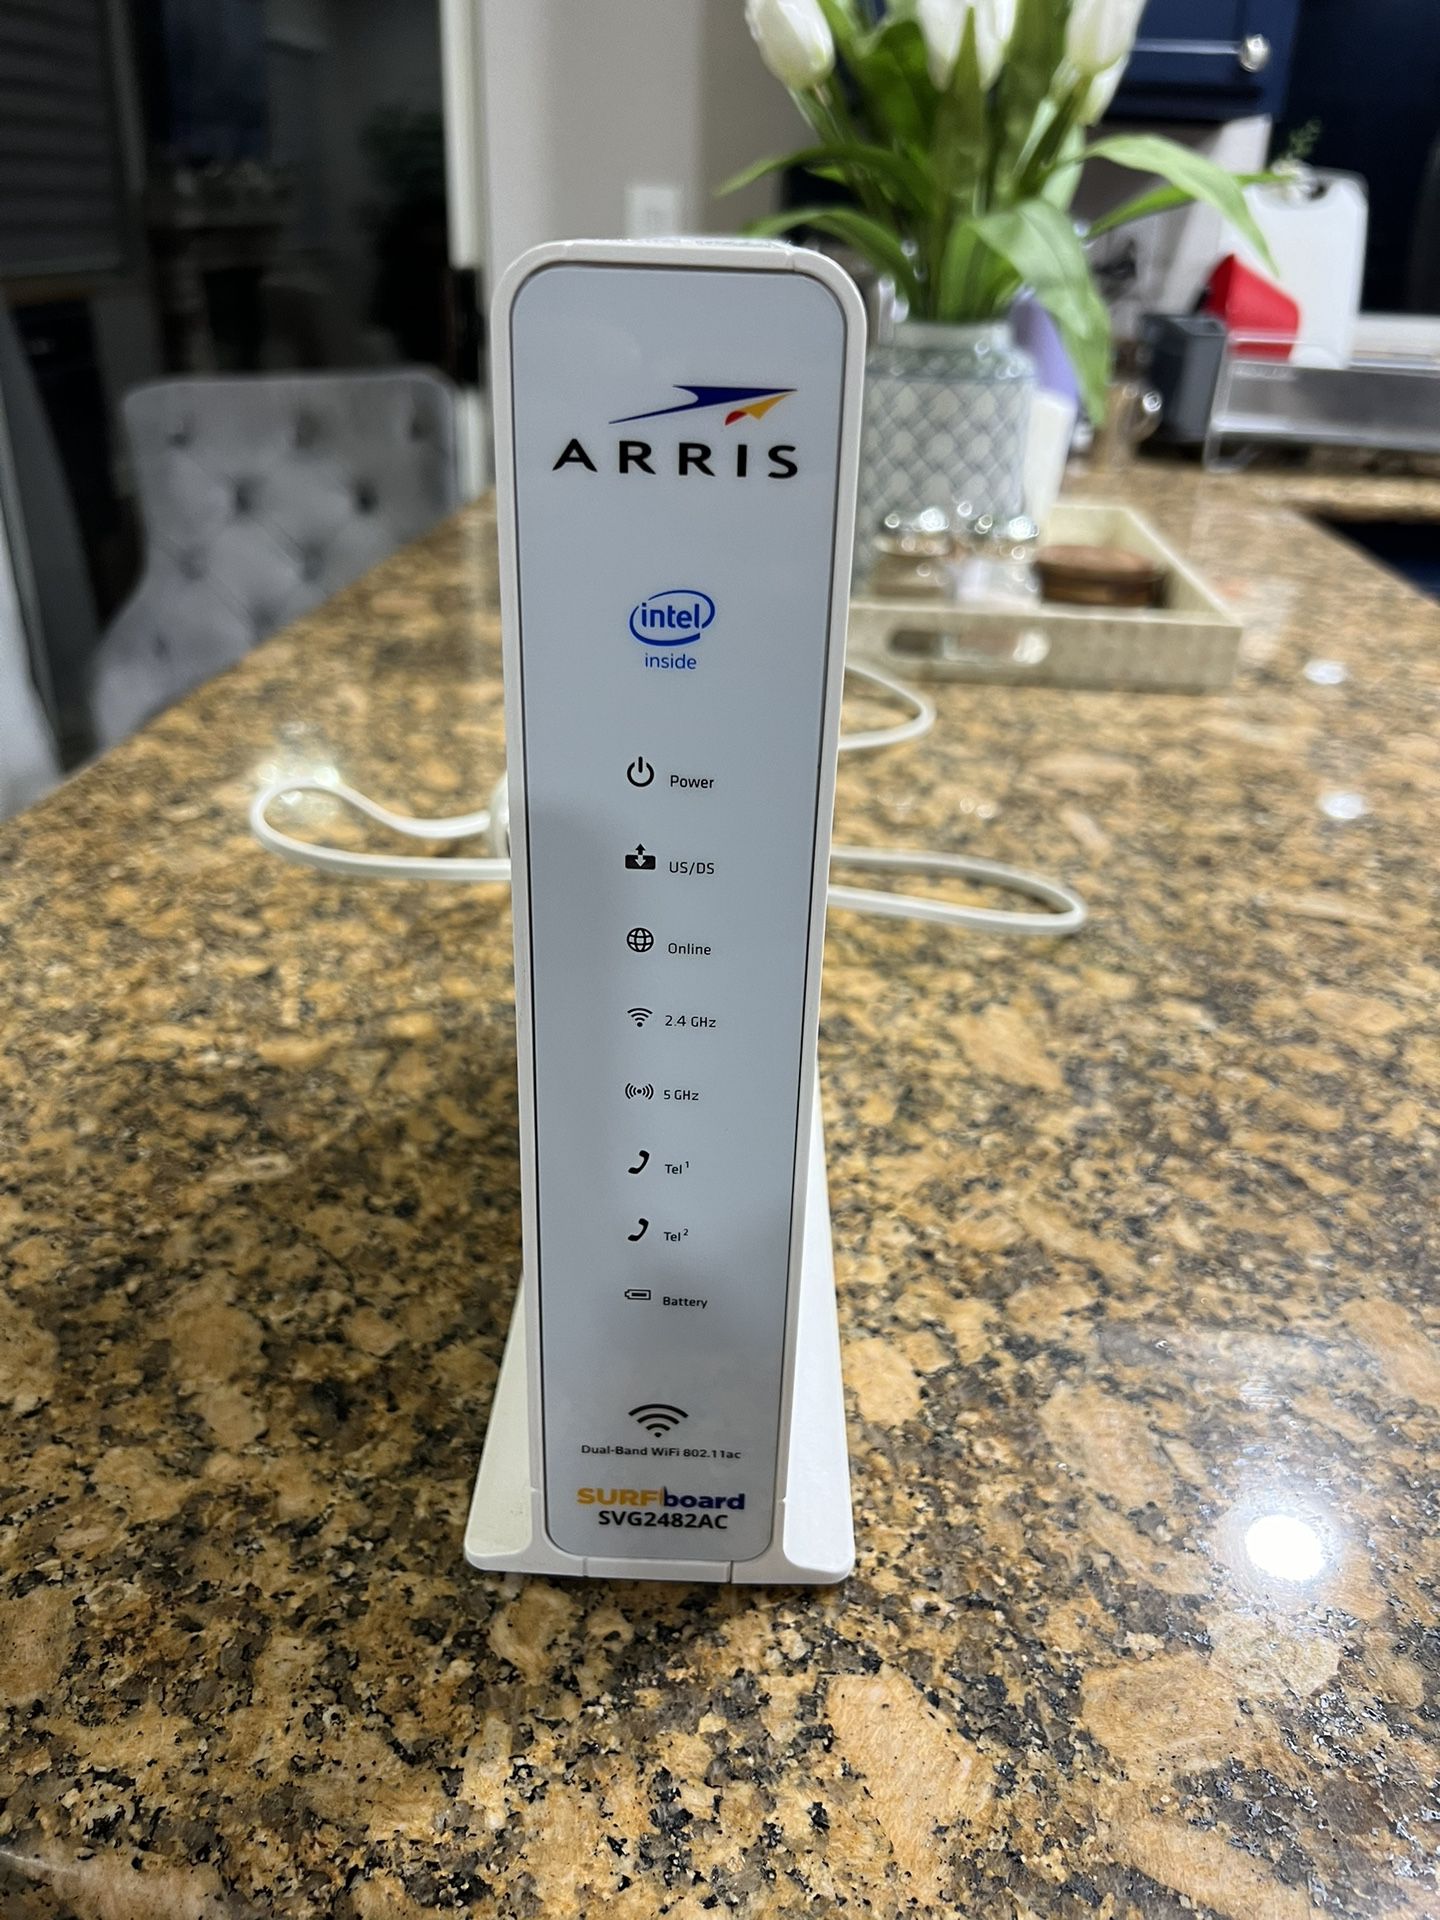 Arris Surfboard Modem Router with Wifi for Xfinity comcast